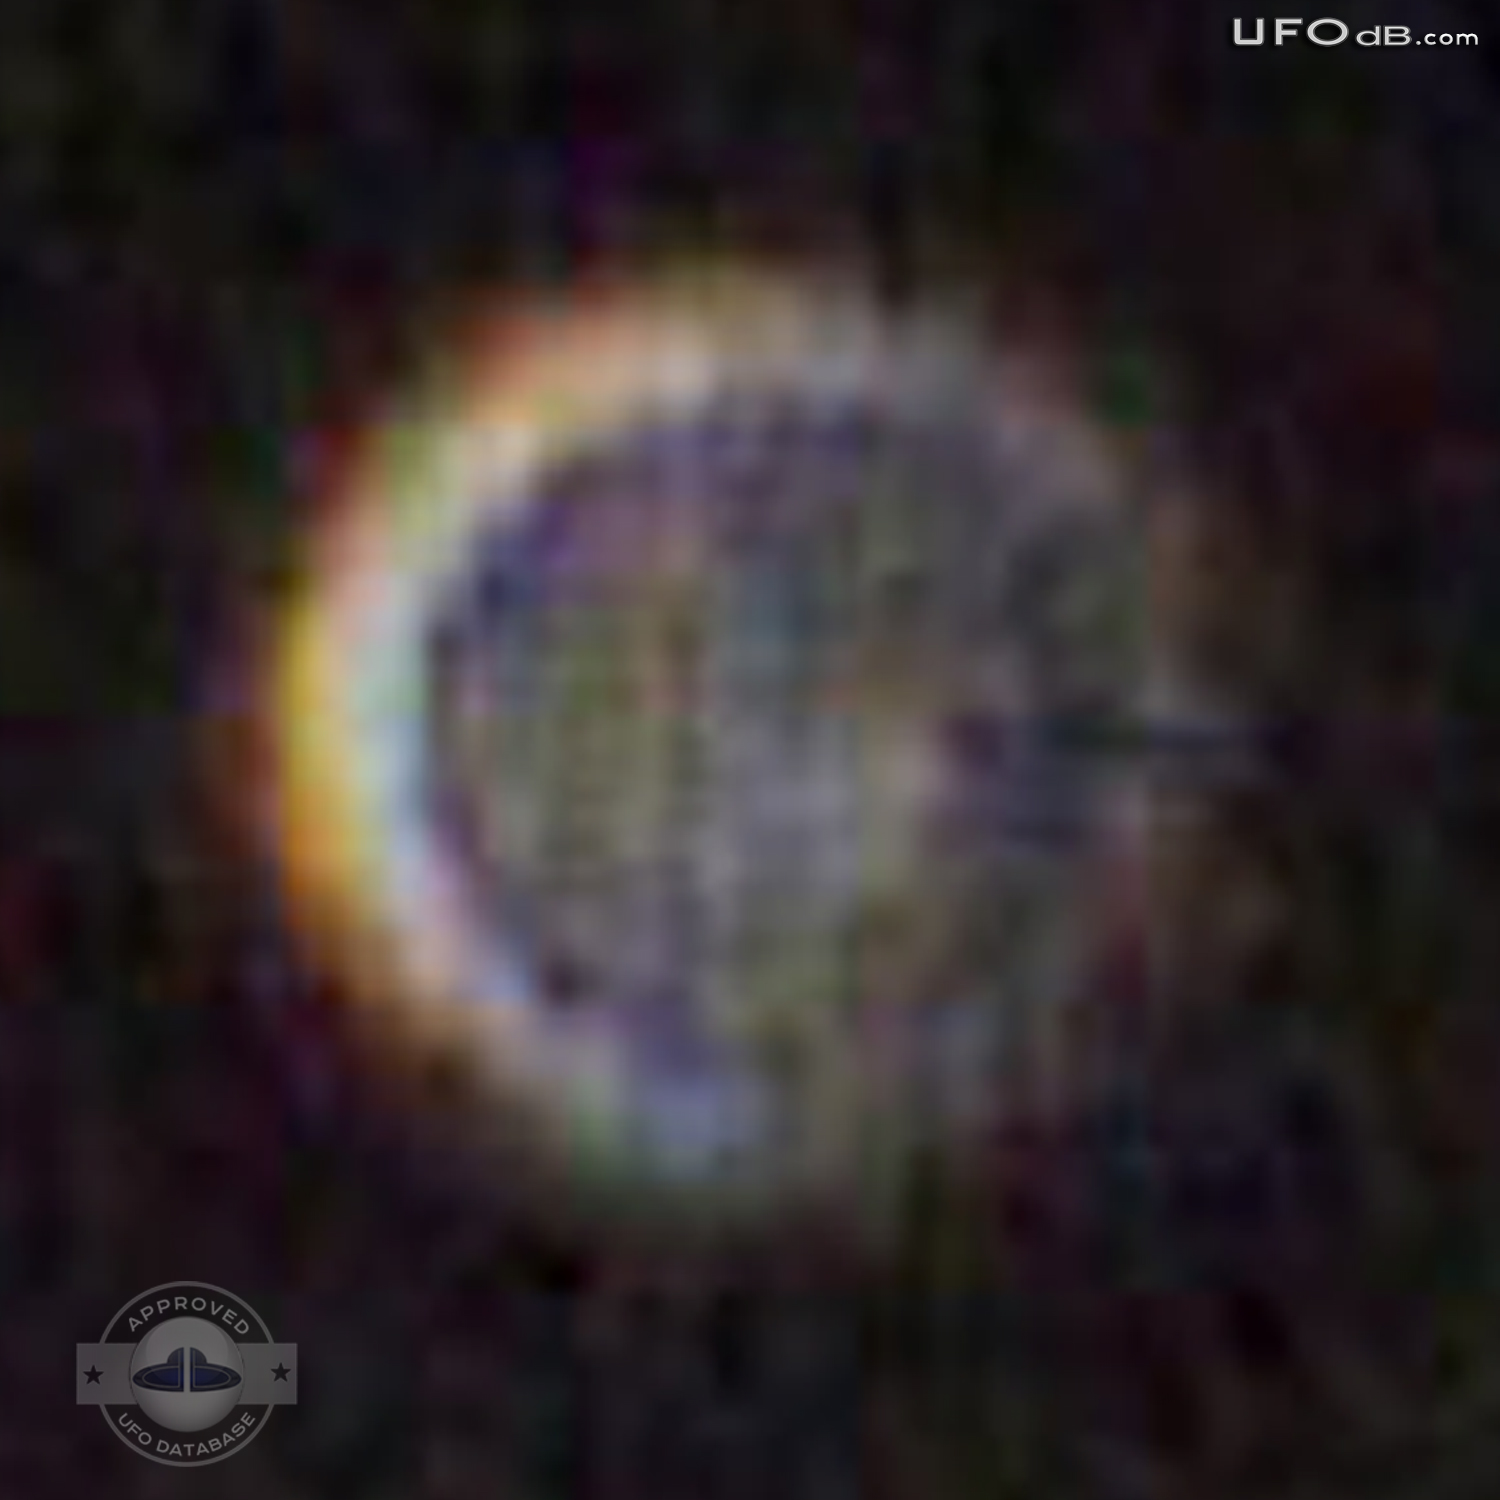 Moon picture get Round UFOs at the same time | England | March 19 2011 UFO Picture #330-5